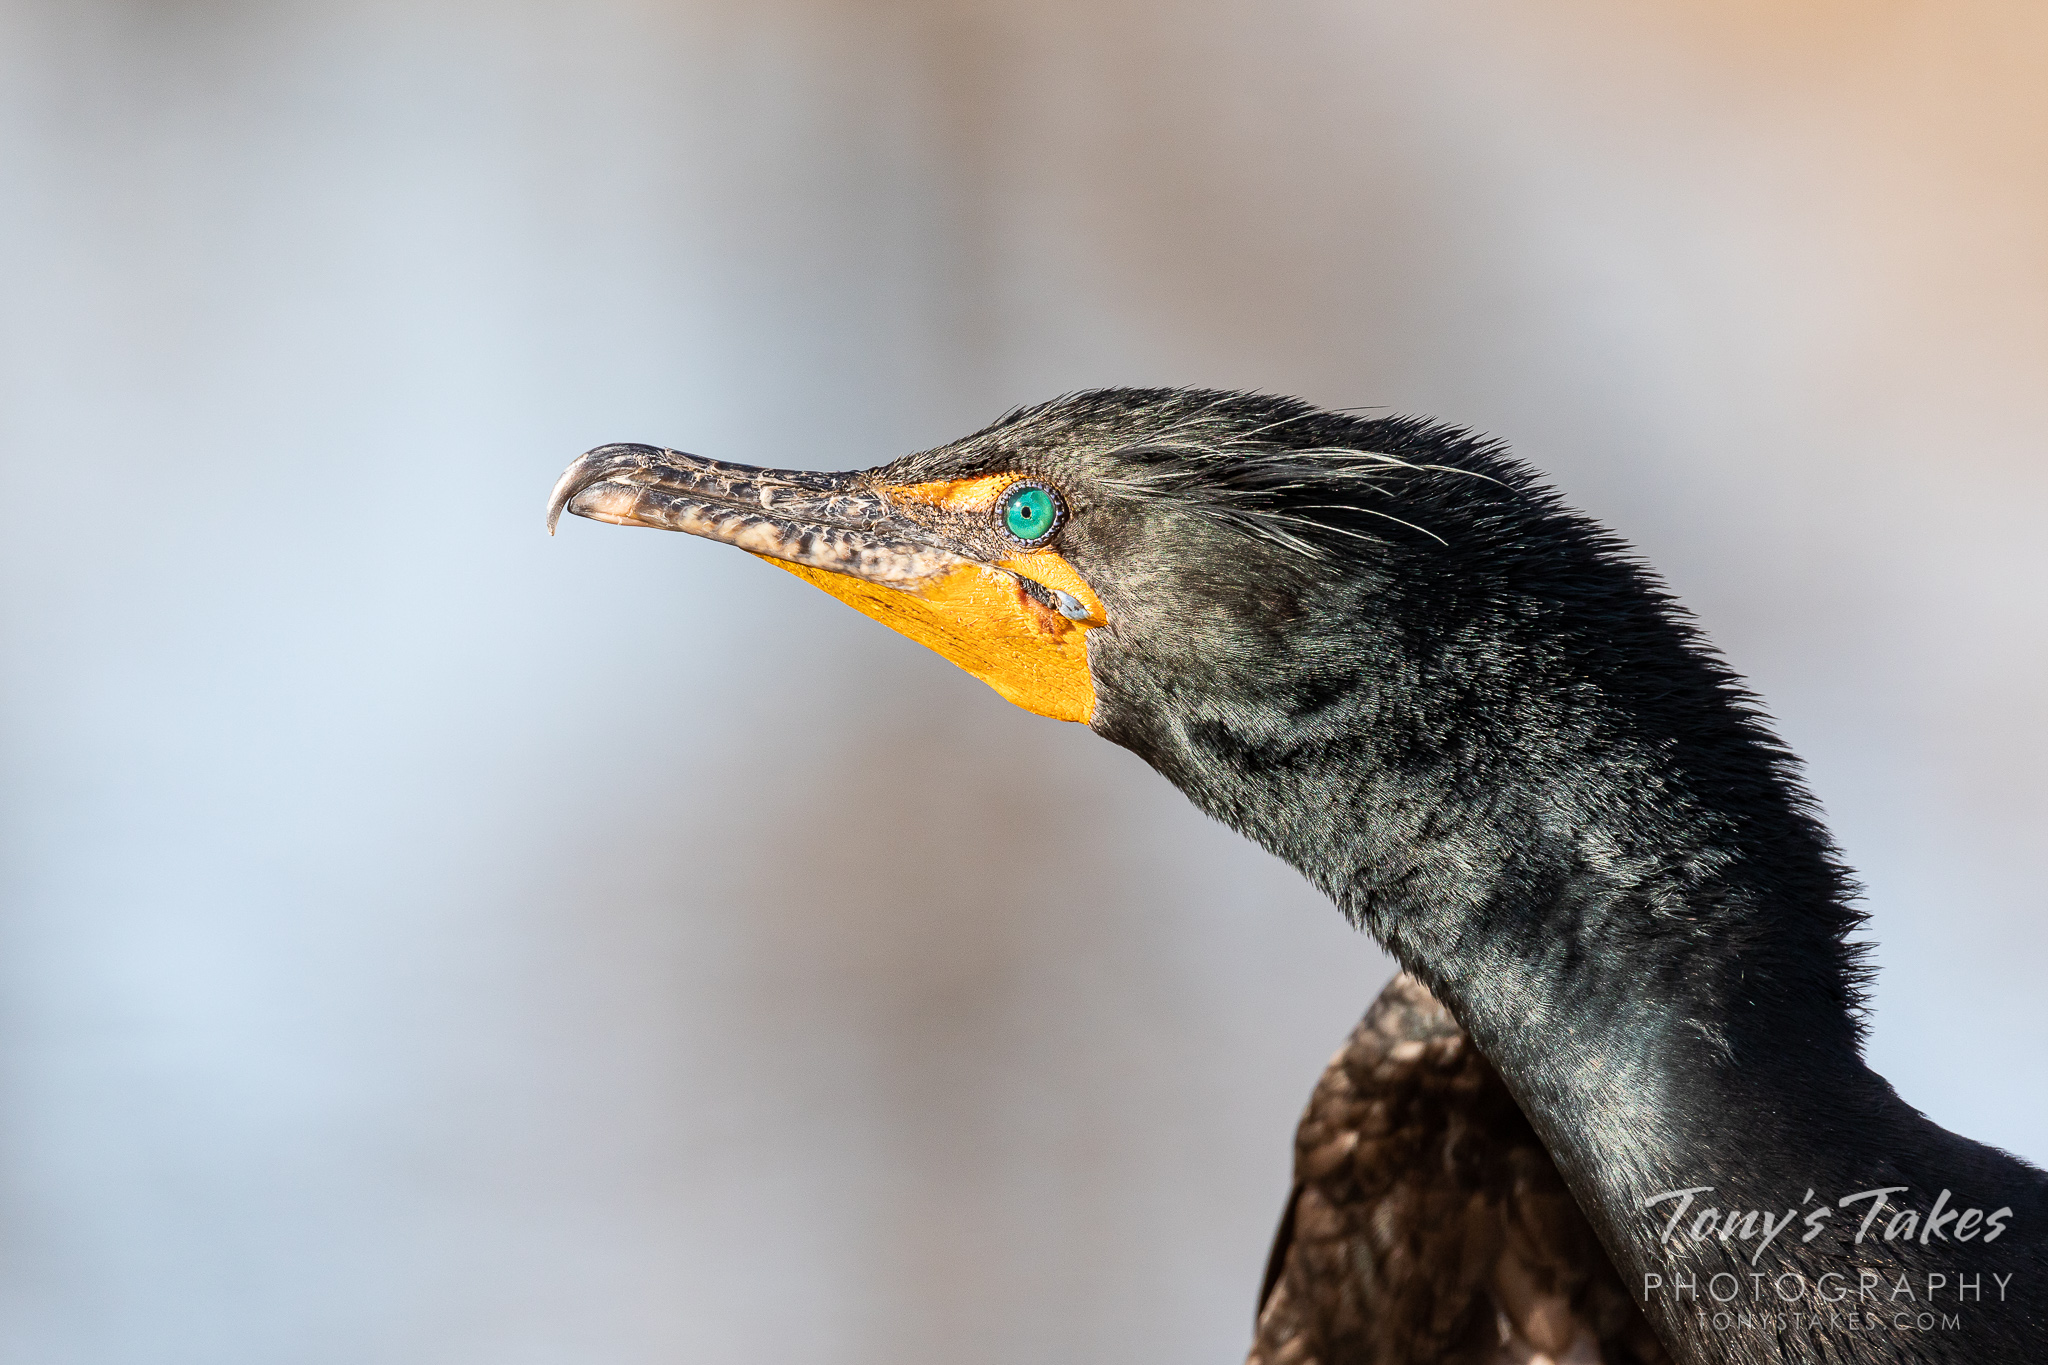 Double-crested cormorant up close and personal